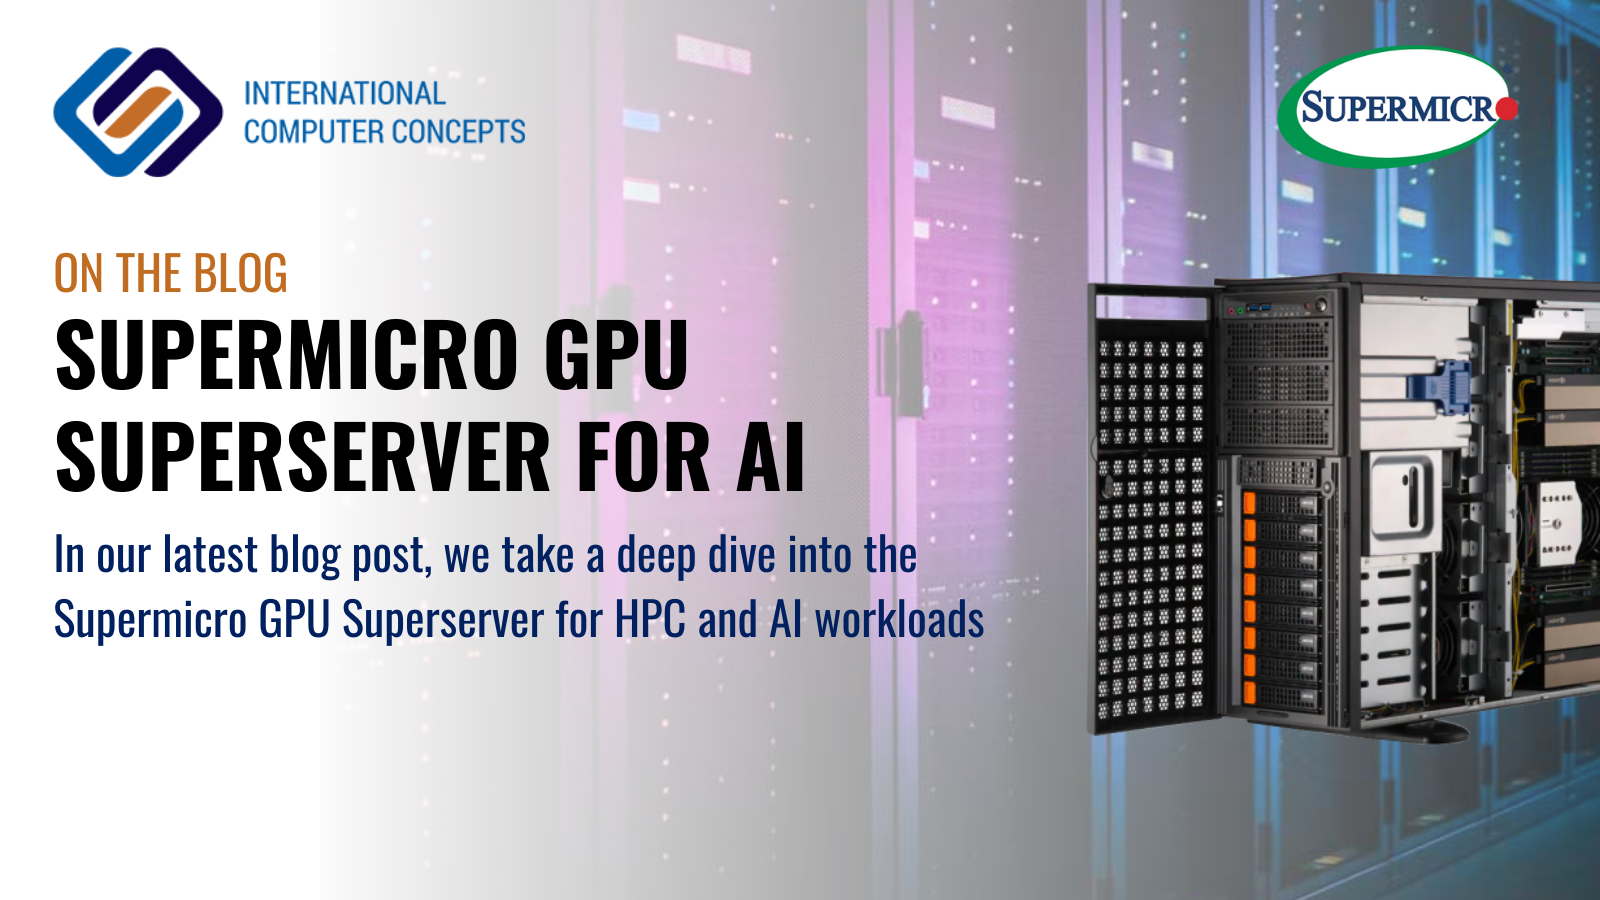 A Deep Dive into the Supermicro GPU Superserver for HPC and AI